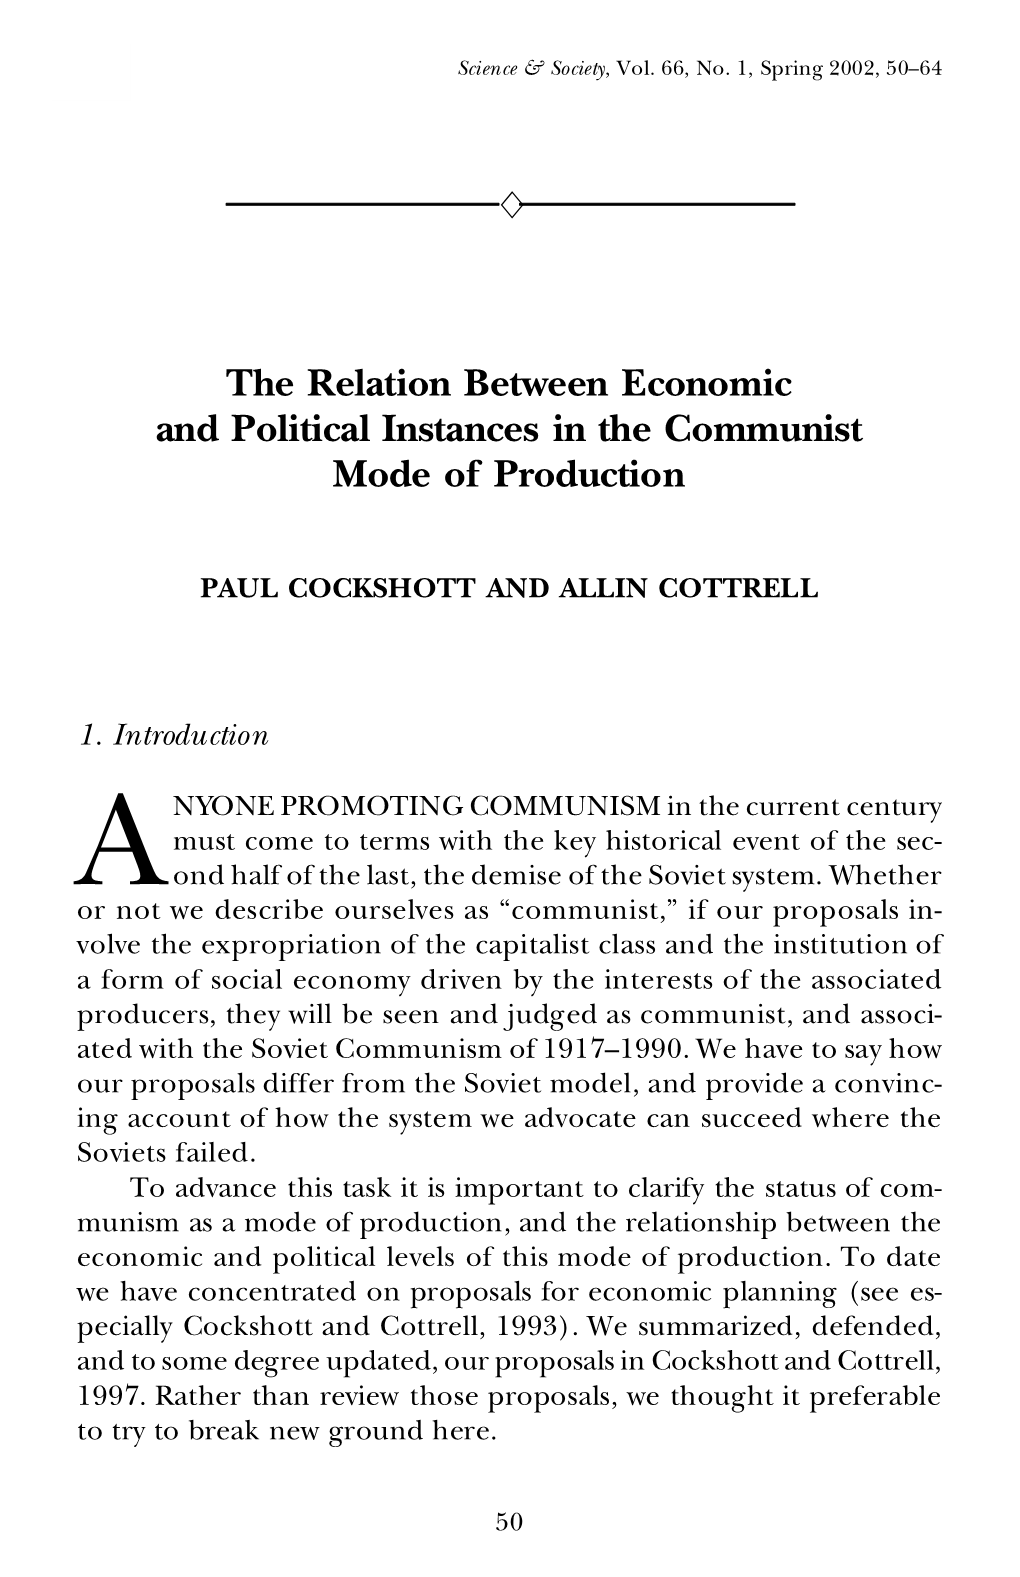 The Relation Between Economic and Political Instances in the Communist Mode of Production